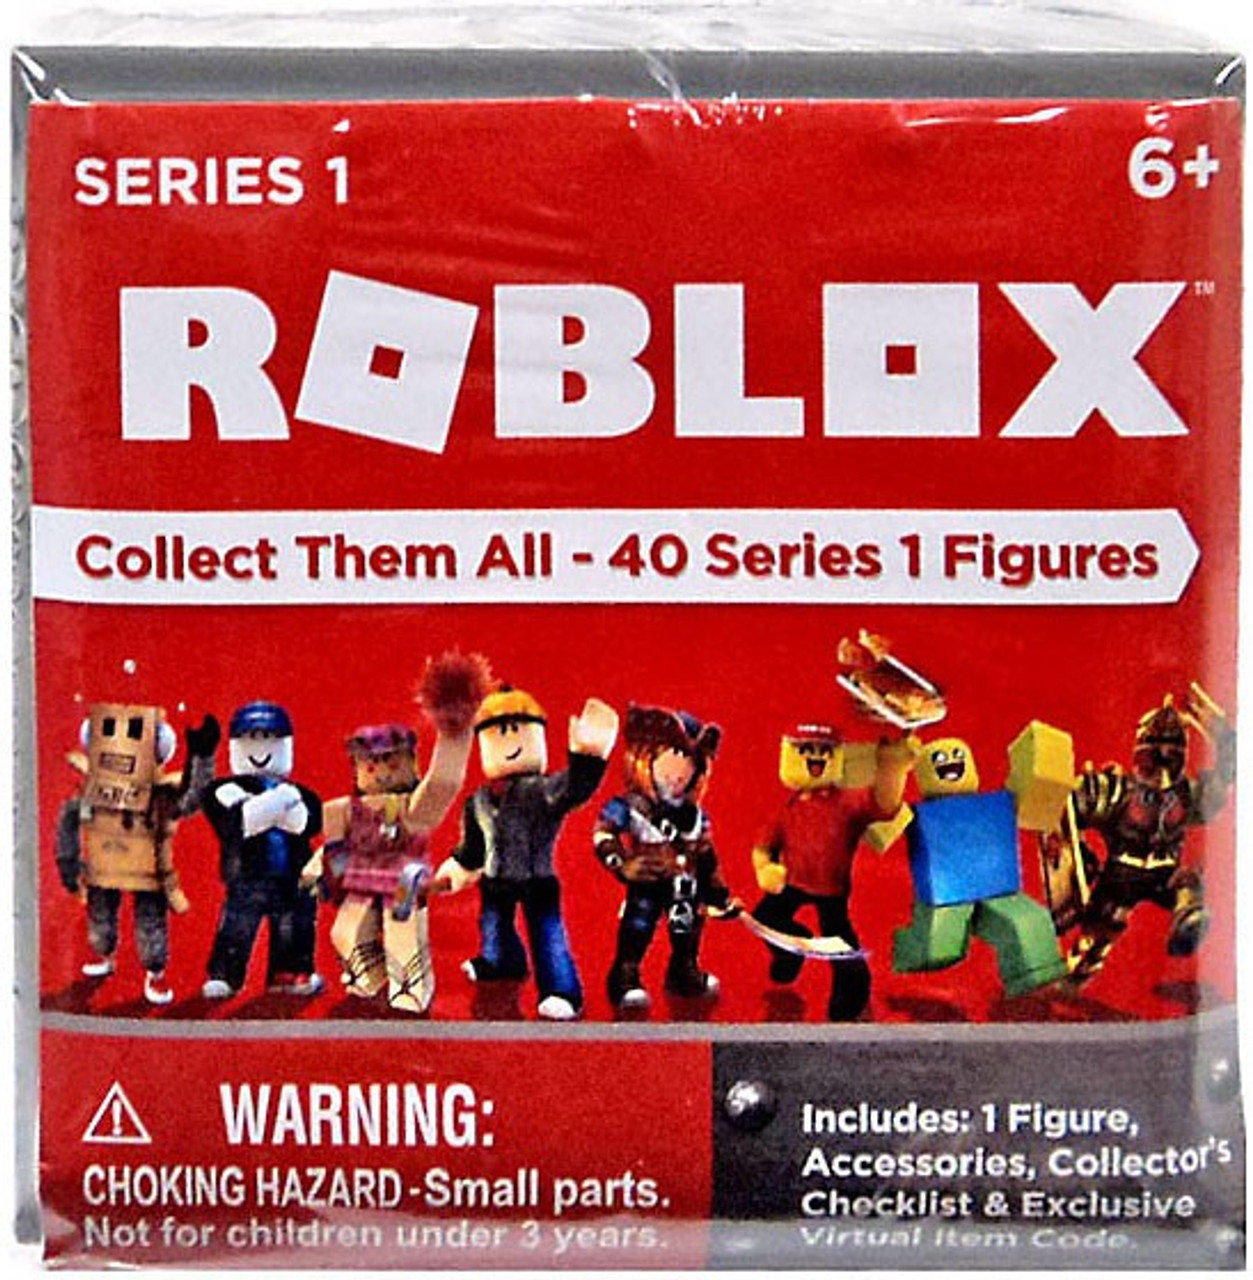 Roblox Series 1 Mystery Pack Silver Cube 1 Random Figure Virtual Item Code Jazwares Toywiz - details about roblox work at a pizza place builder brothers series 1 figures scooter code